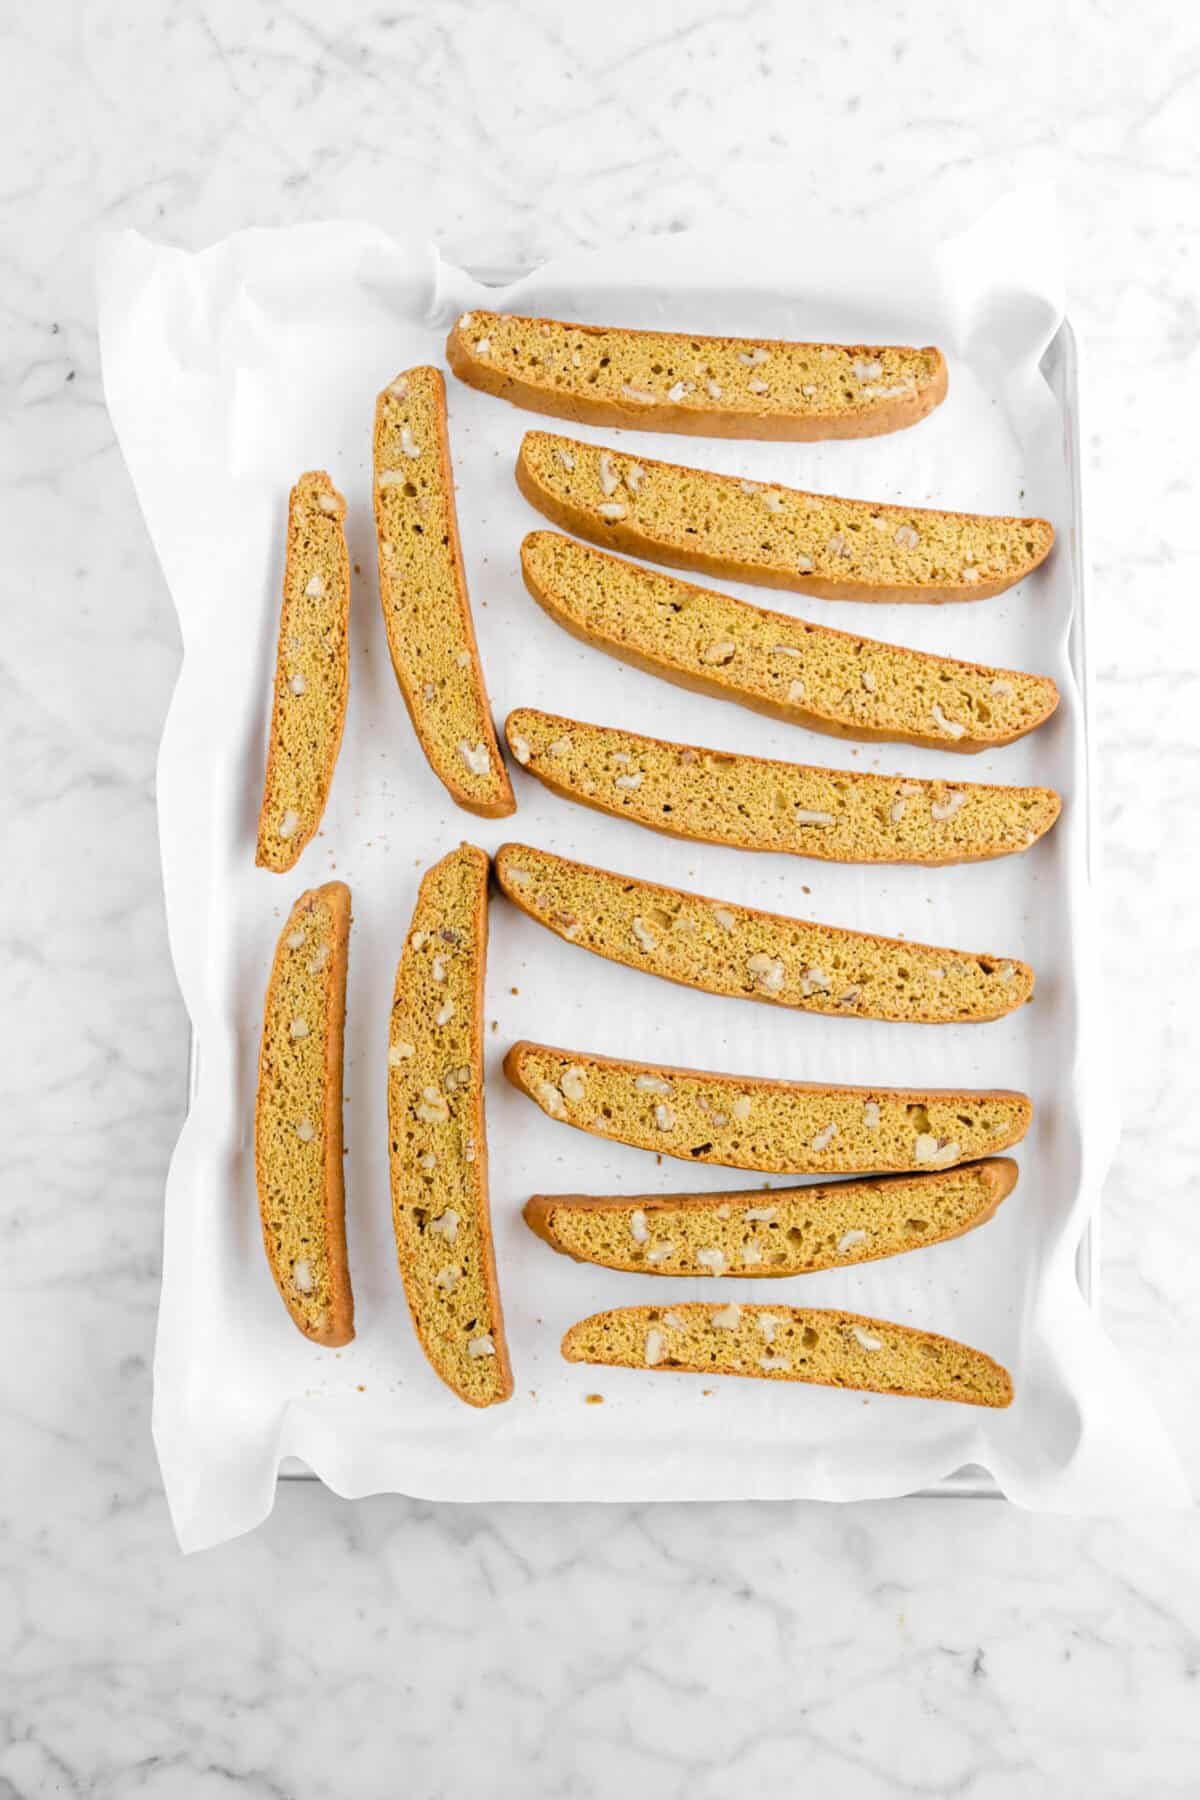 baked biscotti slices on pan